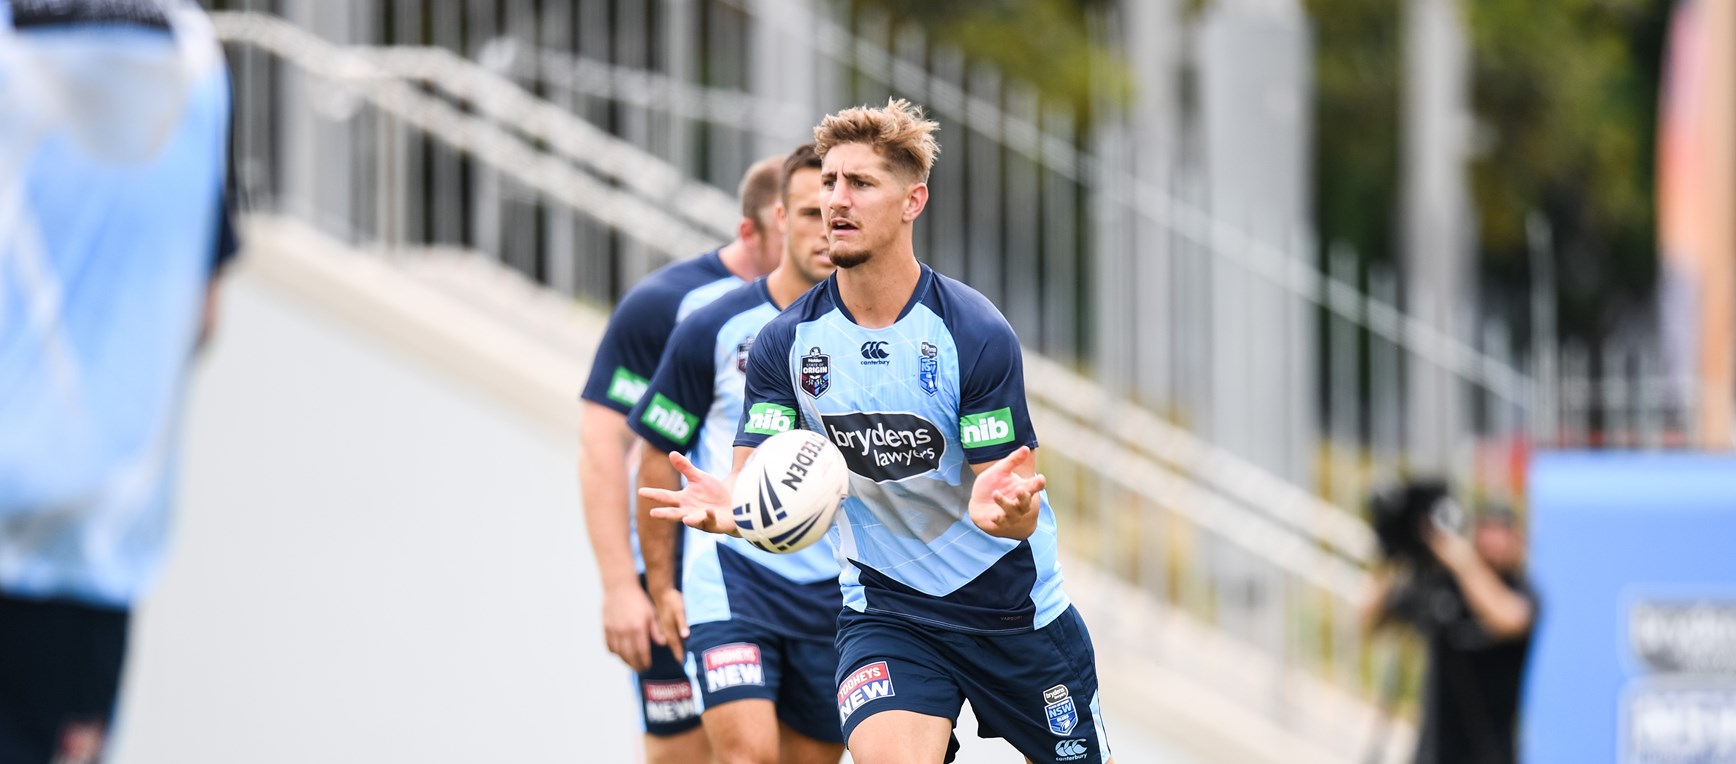 NSWRL Centre of Excellence